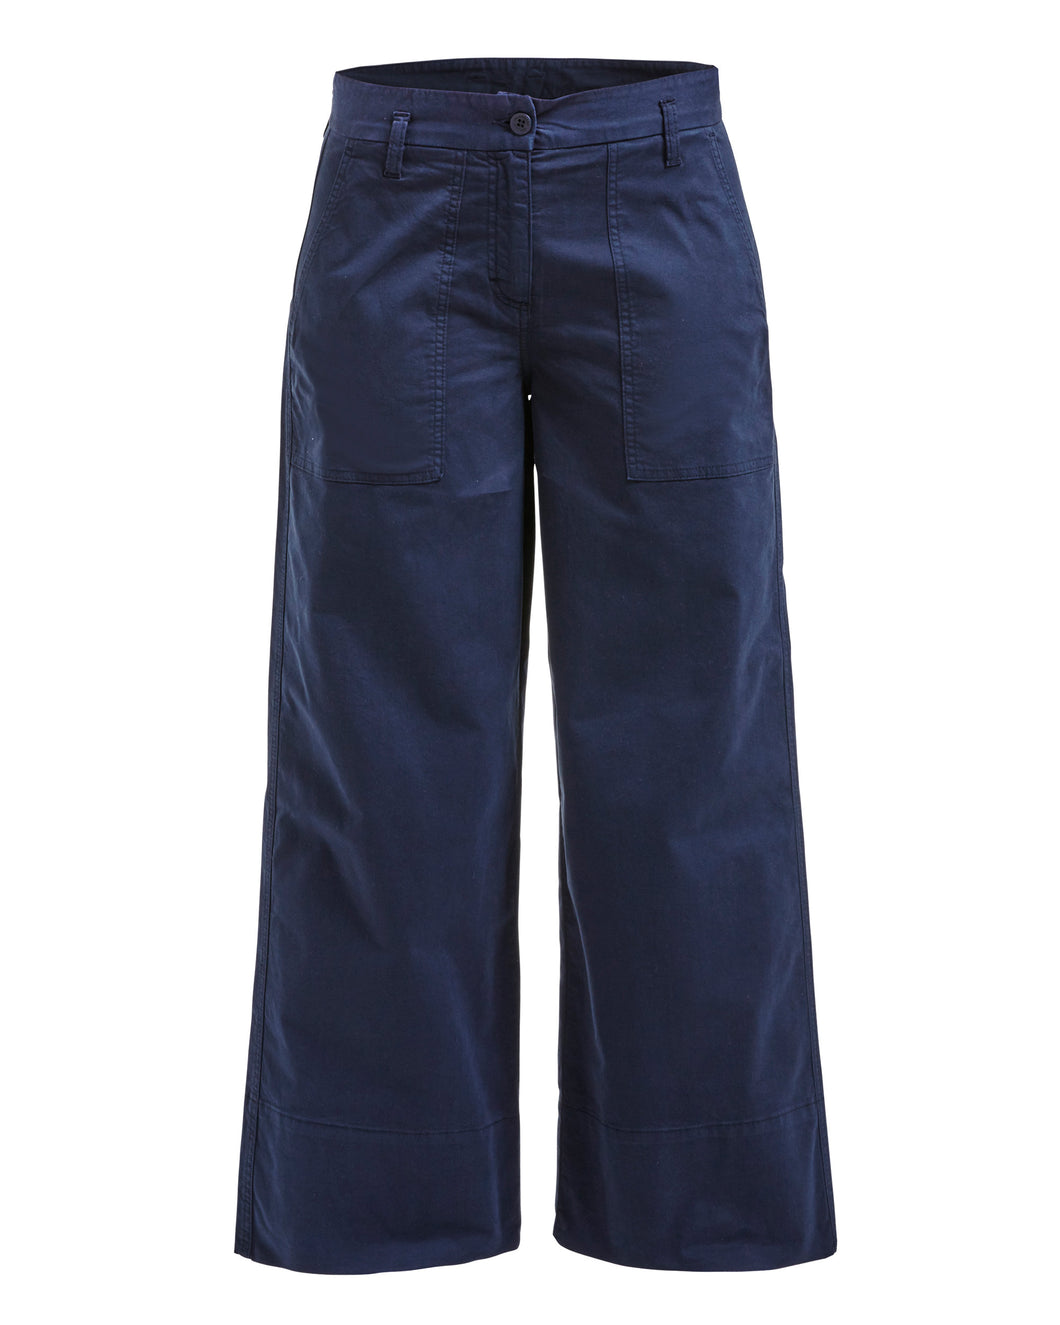 Holebrook Sweden Ebba Worker Trousers - Navy